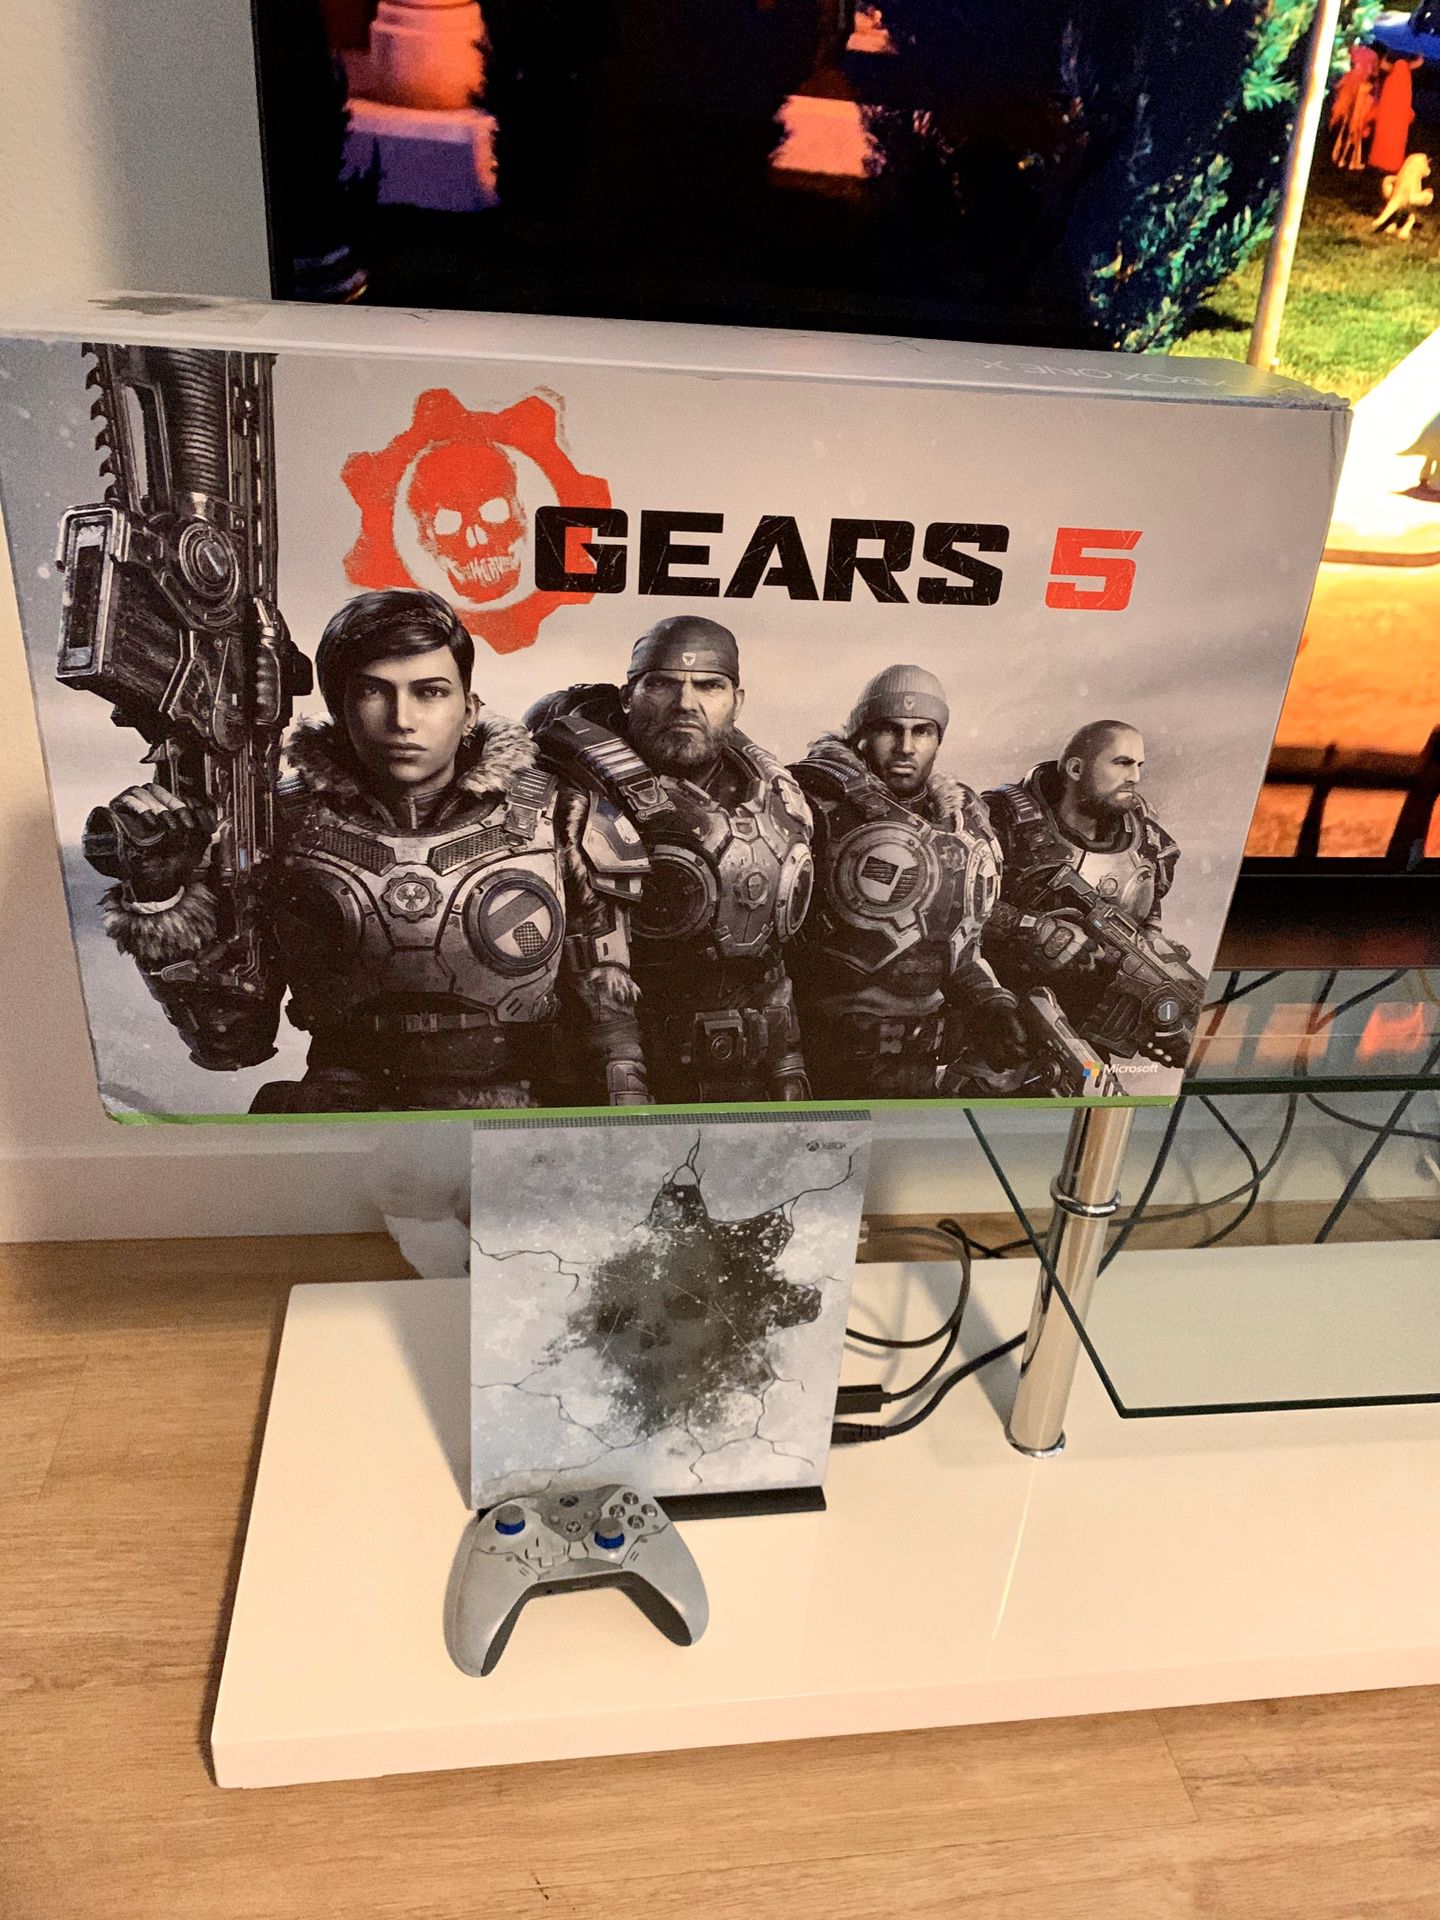 Xbox one x gears 5 edition and two games mortal Kombat 11 and nba2k20